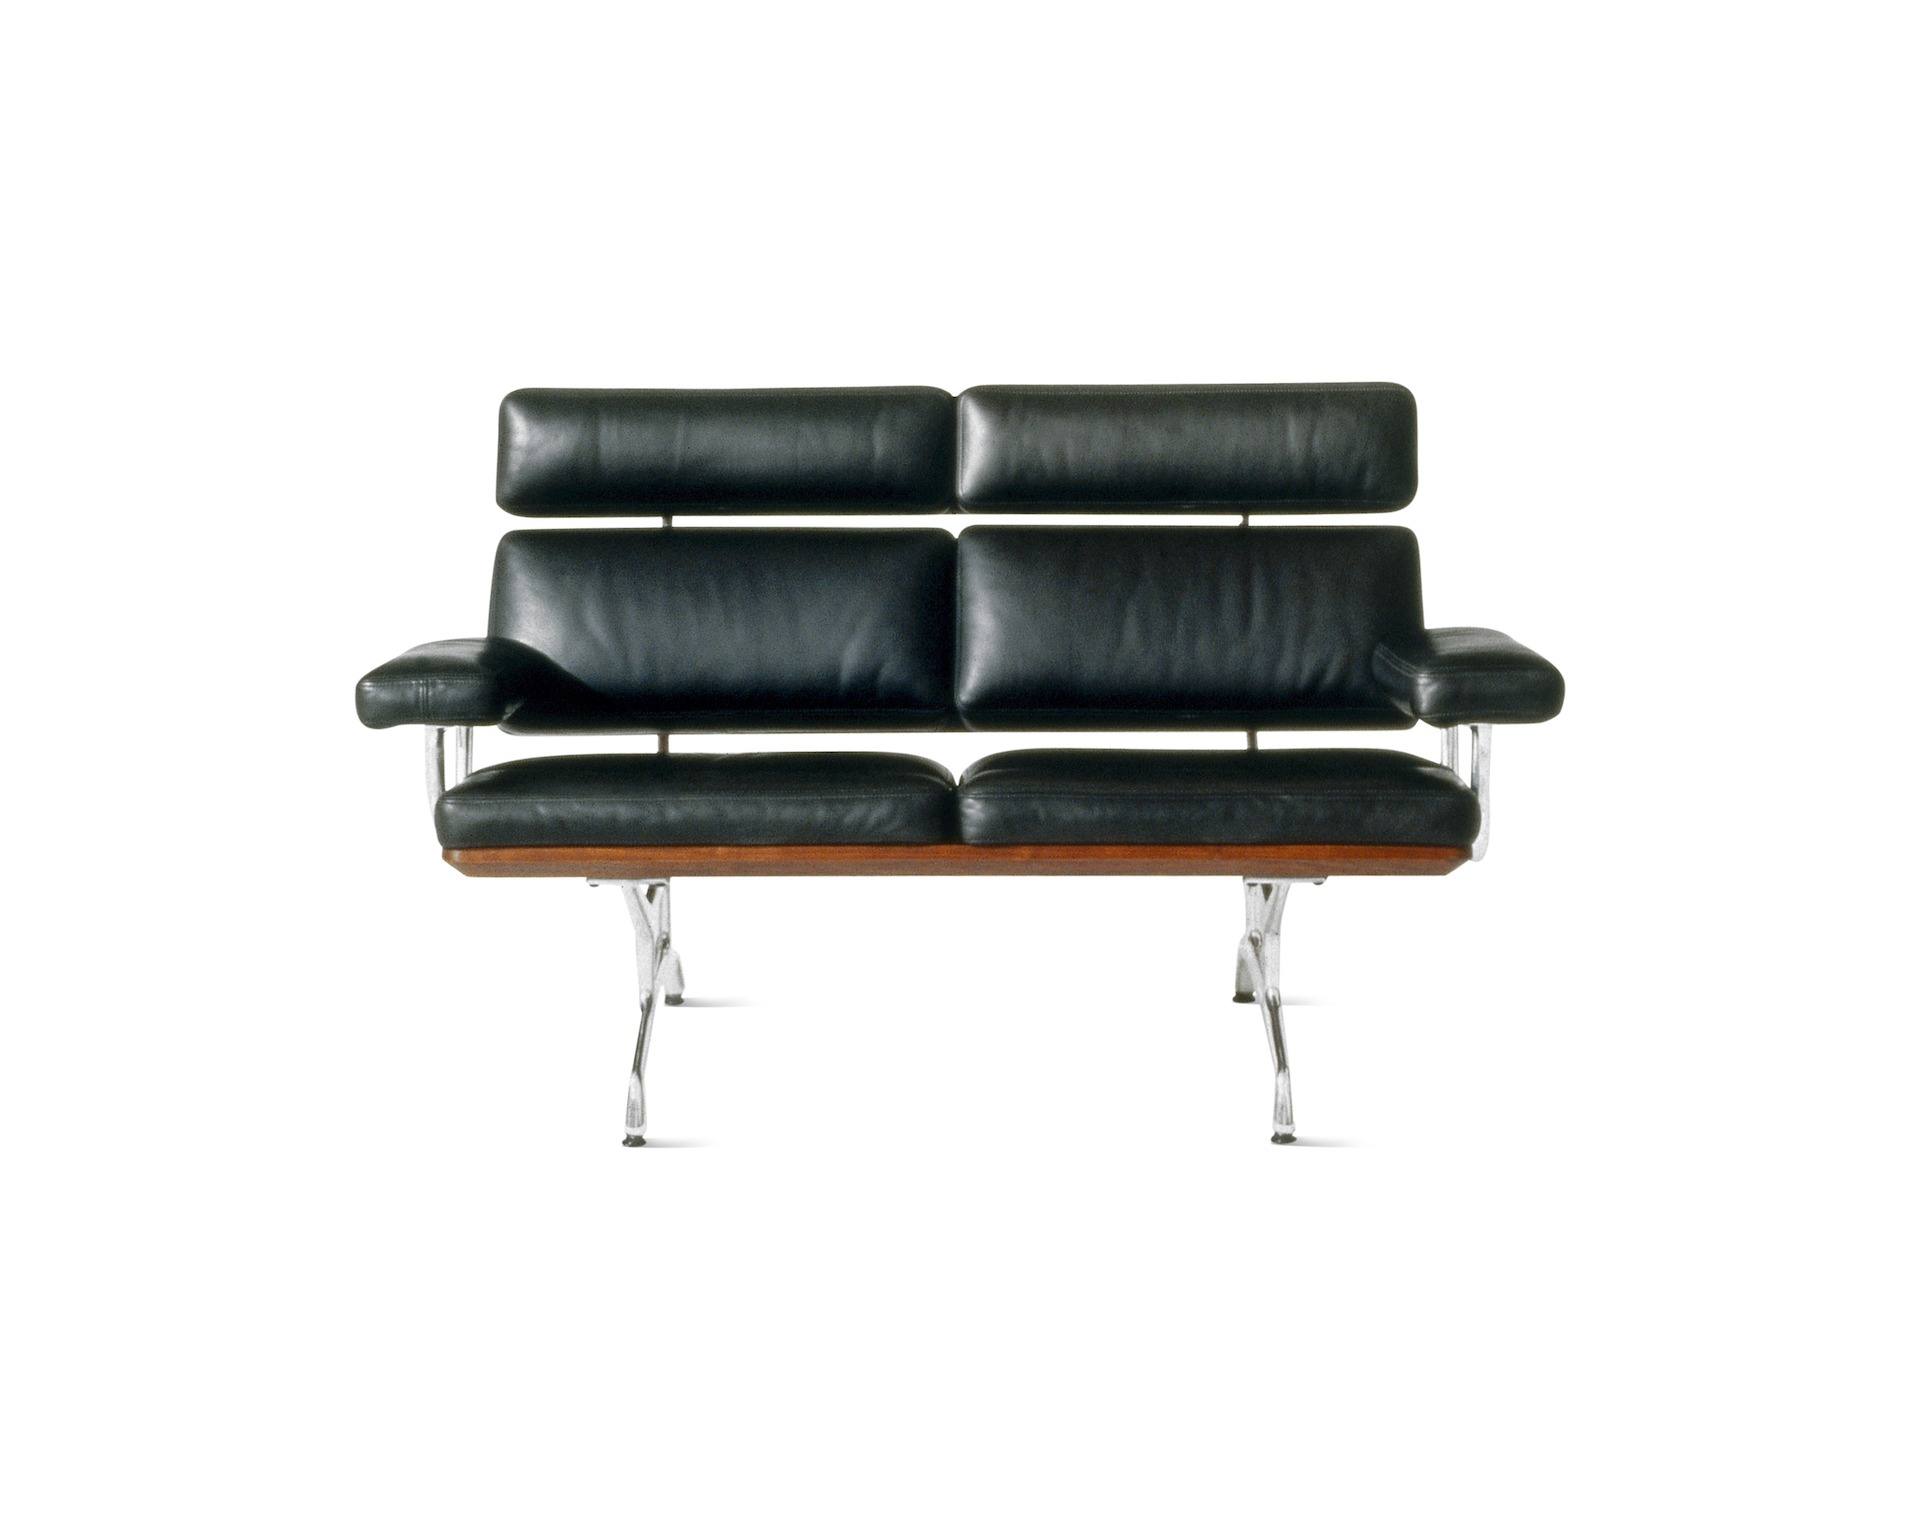 A two-seat Eames Sofa, viewed from the front.